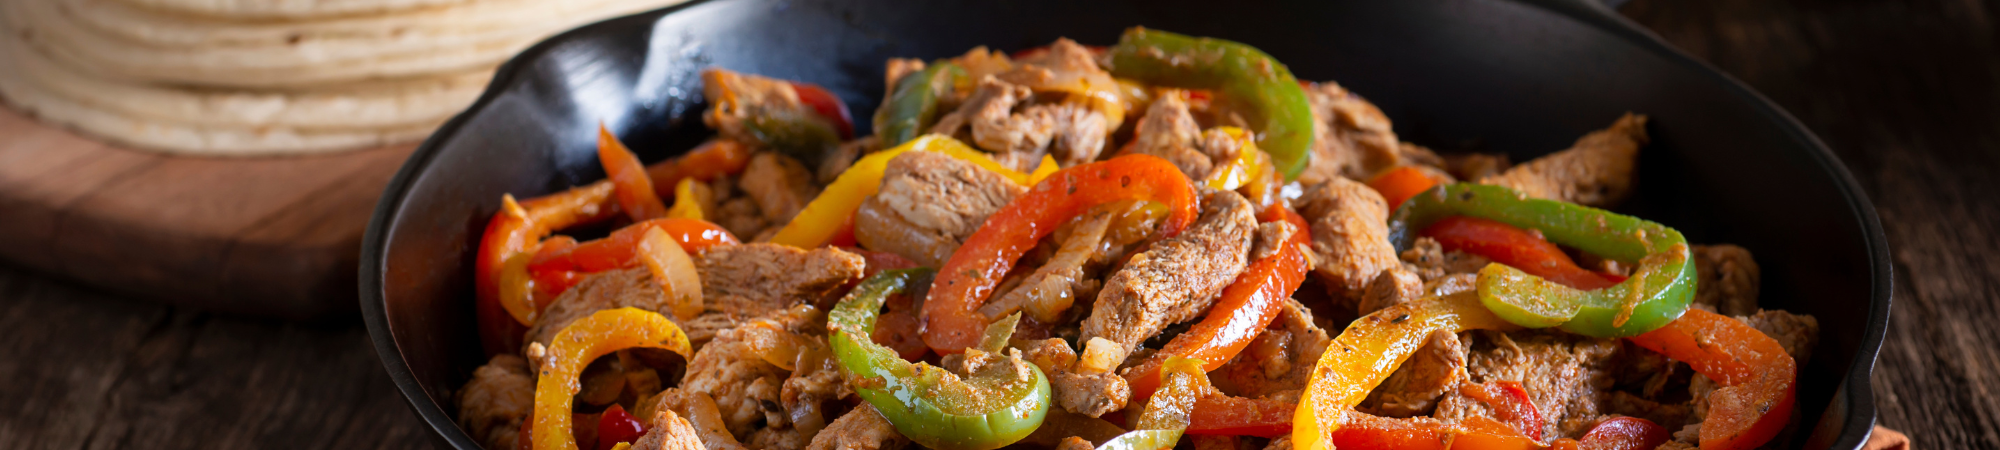 skillet fajitas with peppers